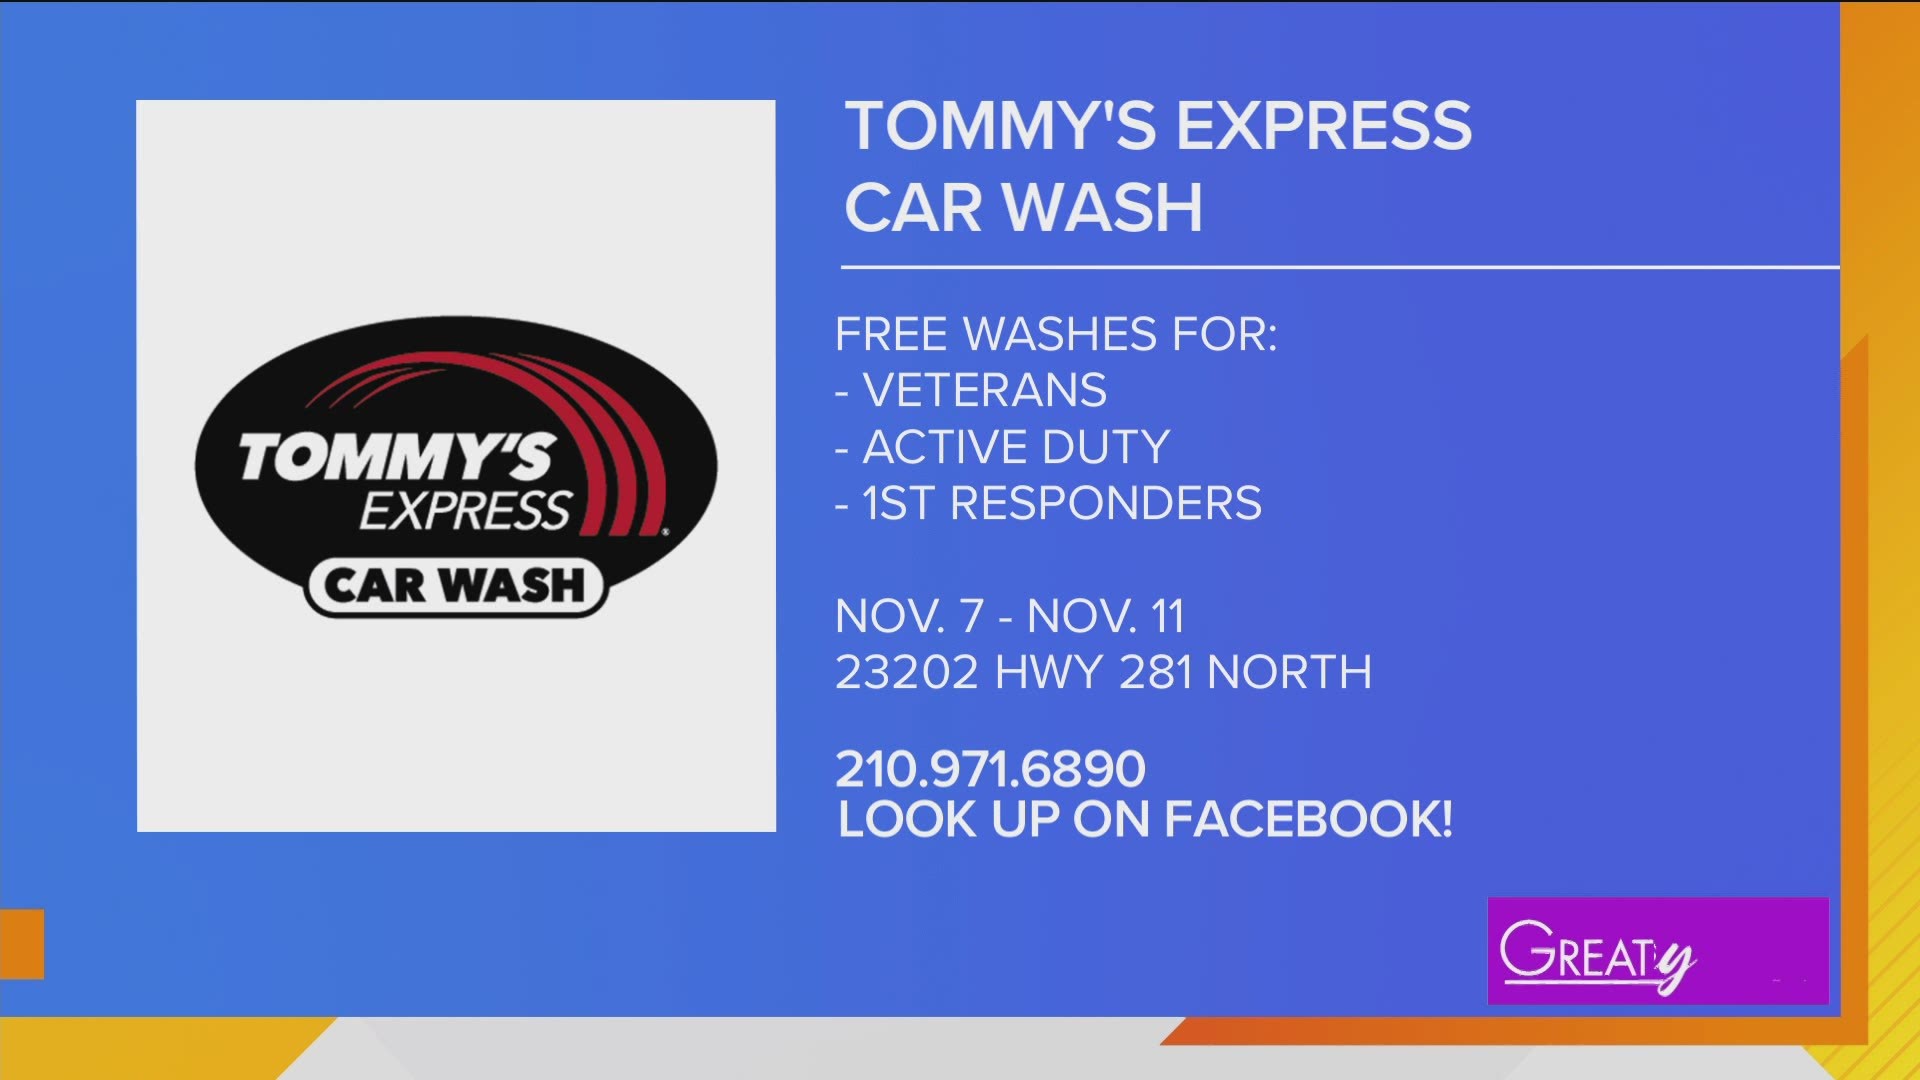 tommy's express car wash coupon code